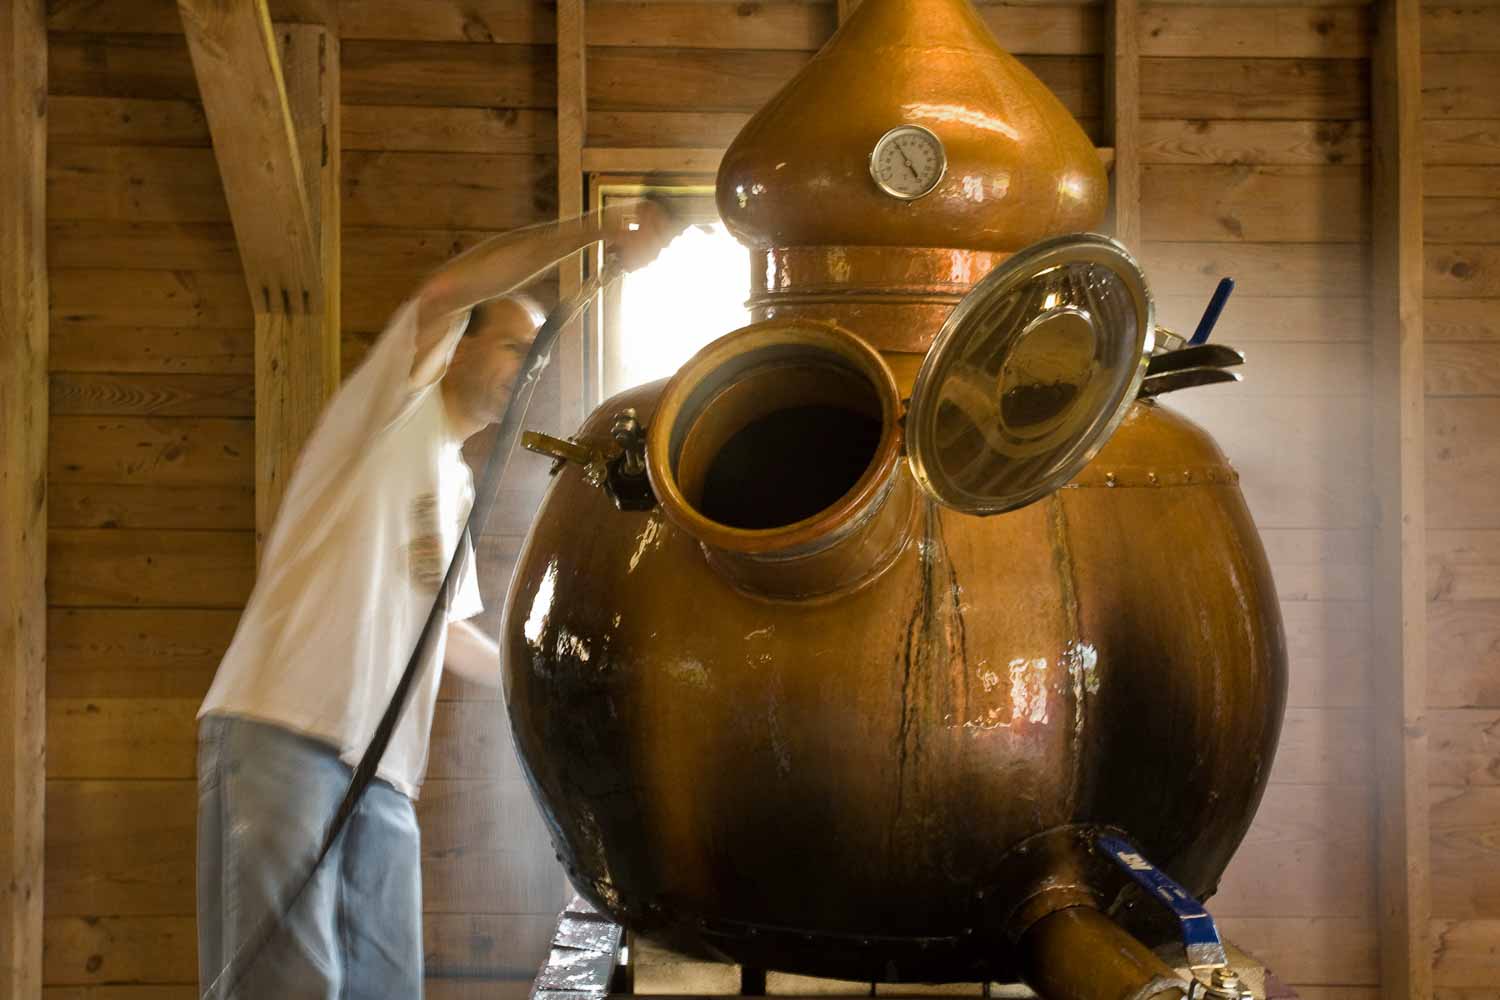 Keith Bodine, of Sweetgrass Winery and Distillery, cleaning his pot still.